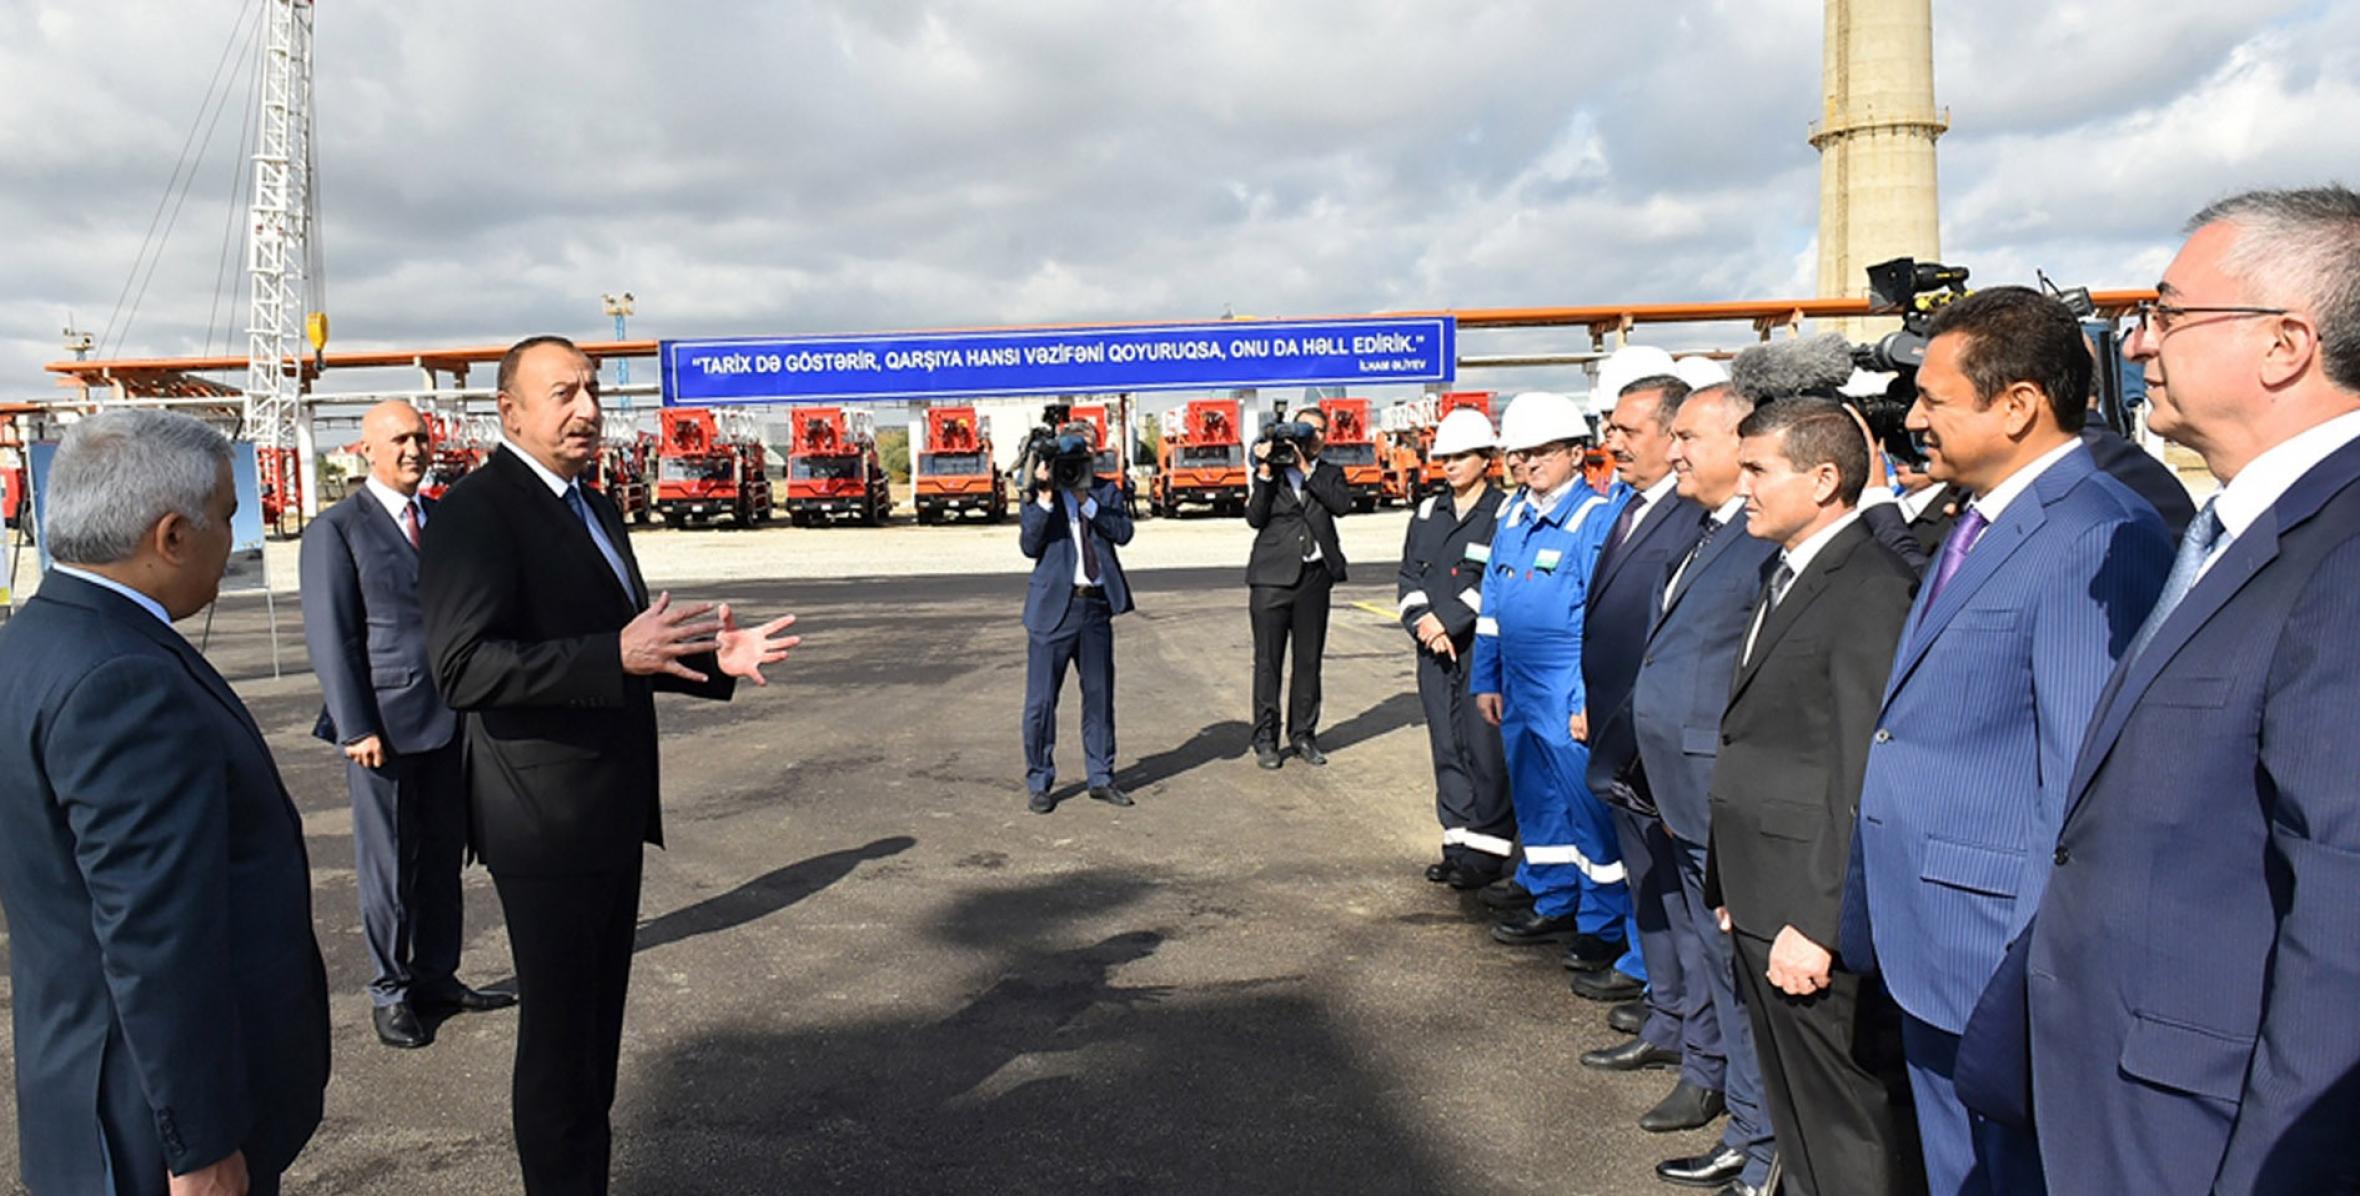 Speech by Ilham Aliyev at the ground breaking ceremony of new bitumen production facility